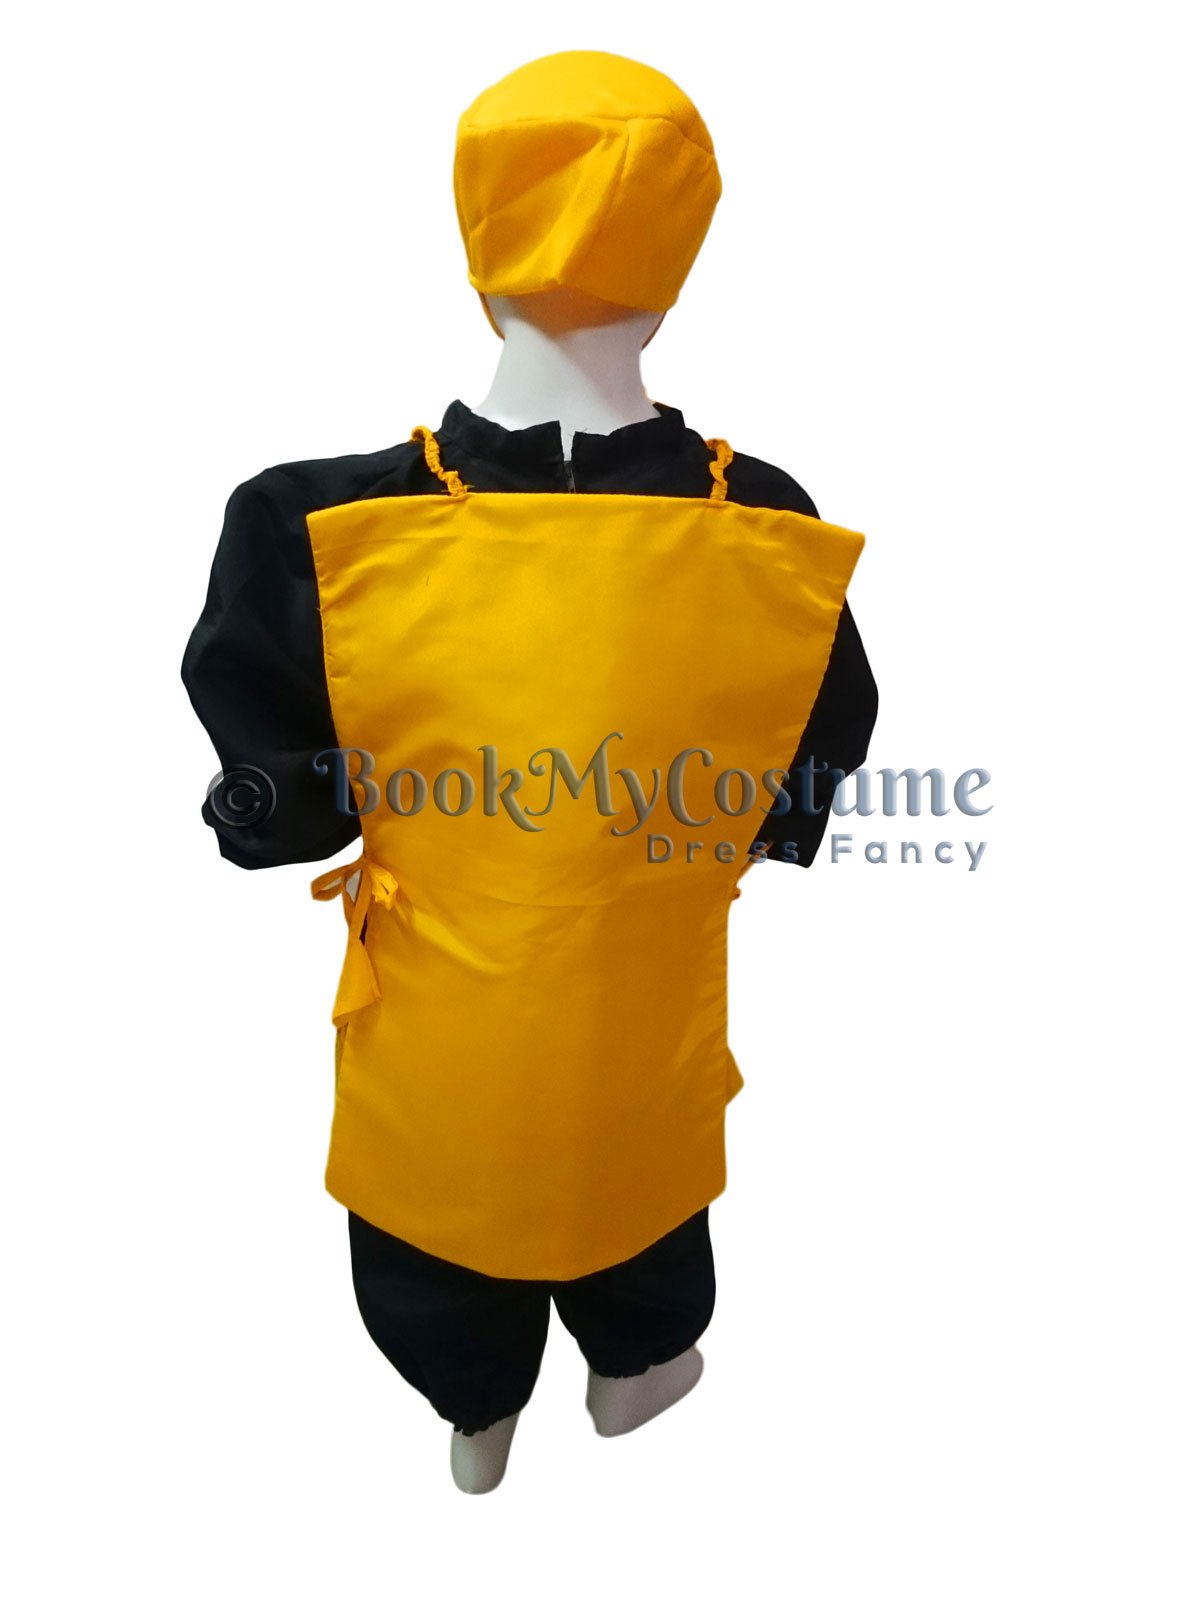 Buy Fancy Steps Realistic Look Junk Food Burger Fancy Dress Costume for  School Competition (5 to 6 years) Online at Low Prices in India - Amazon.in